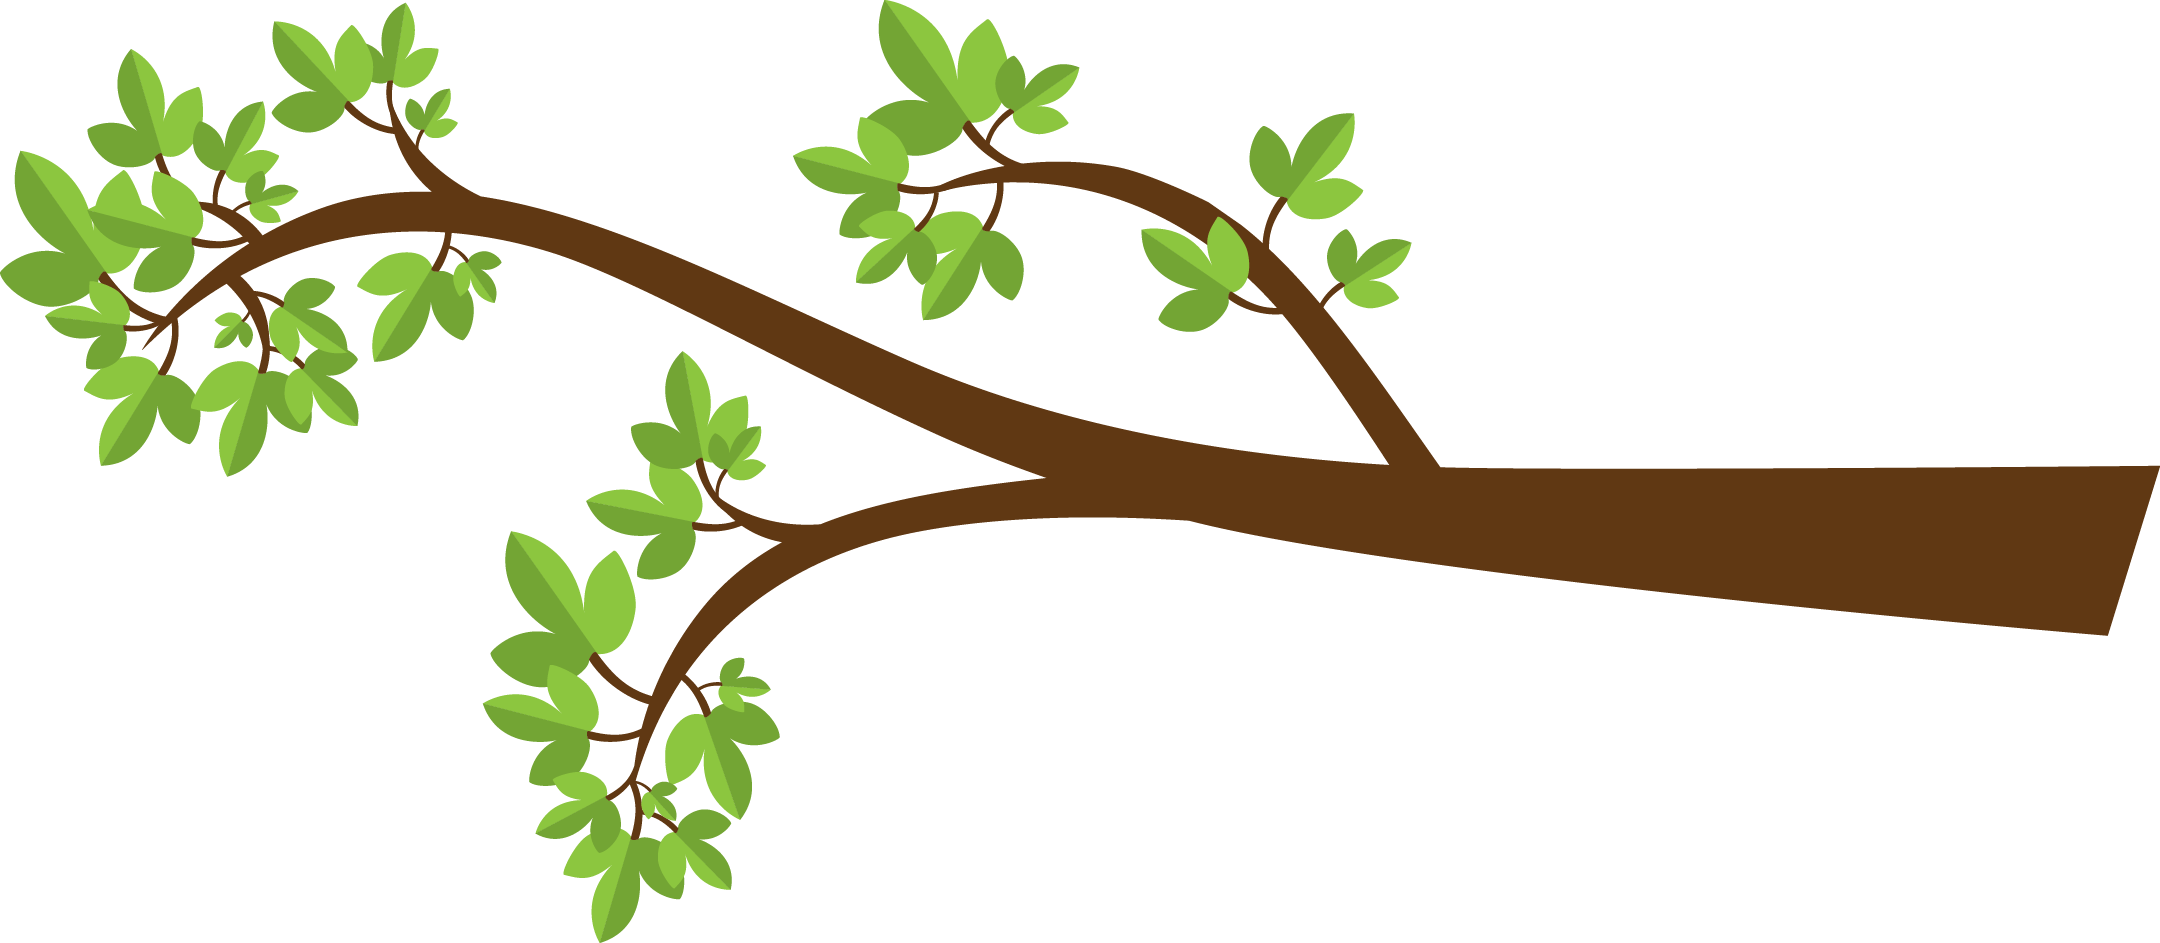 tree branch with leaves | Clipart Panda - Free Clipart Images